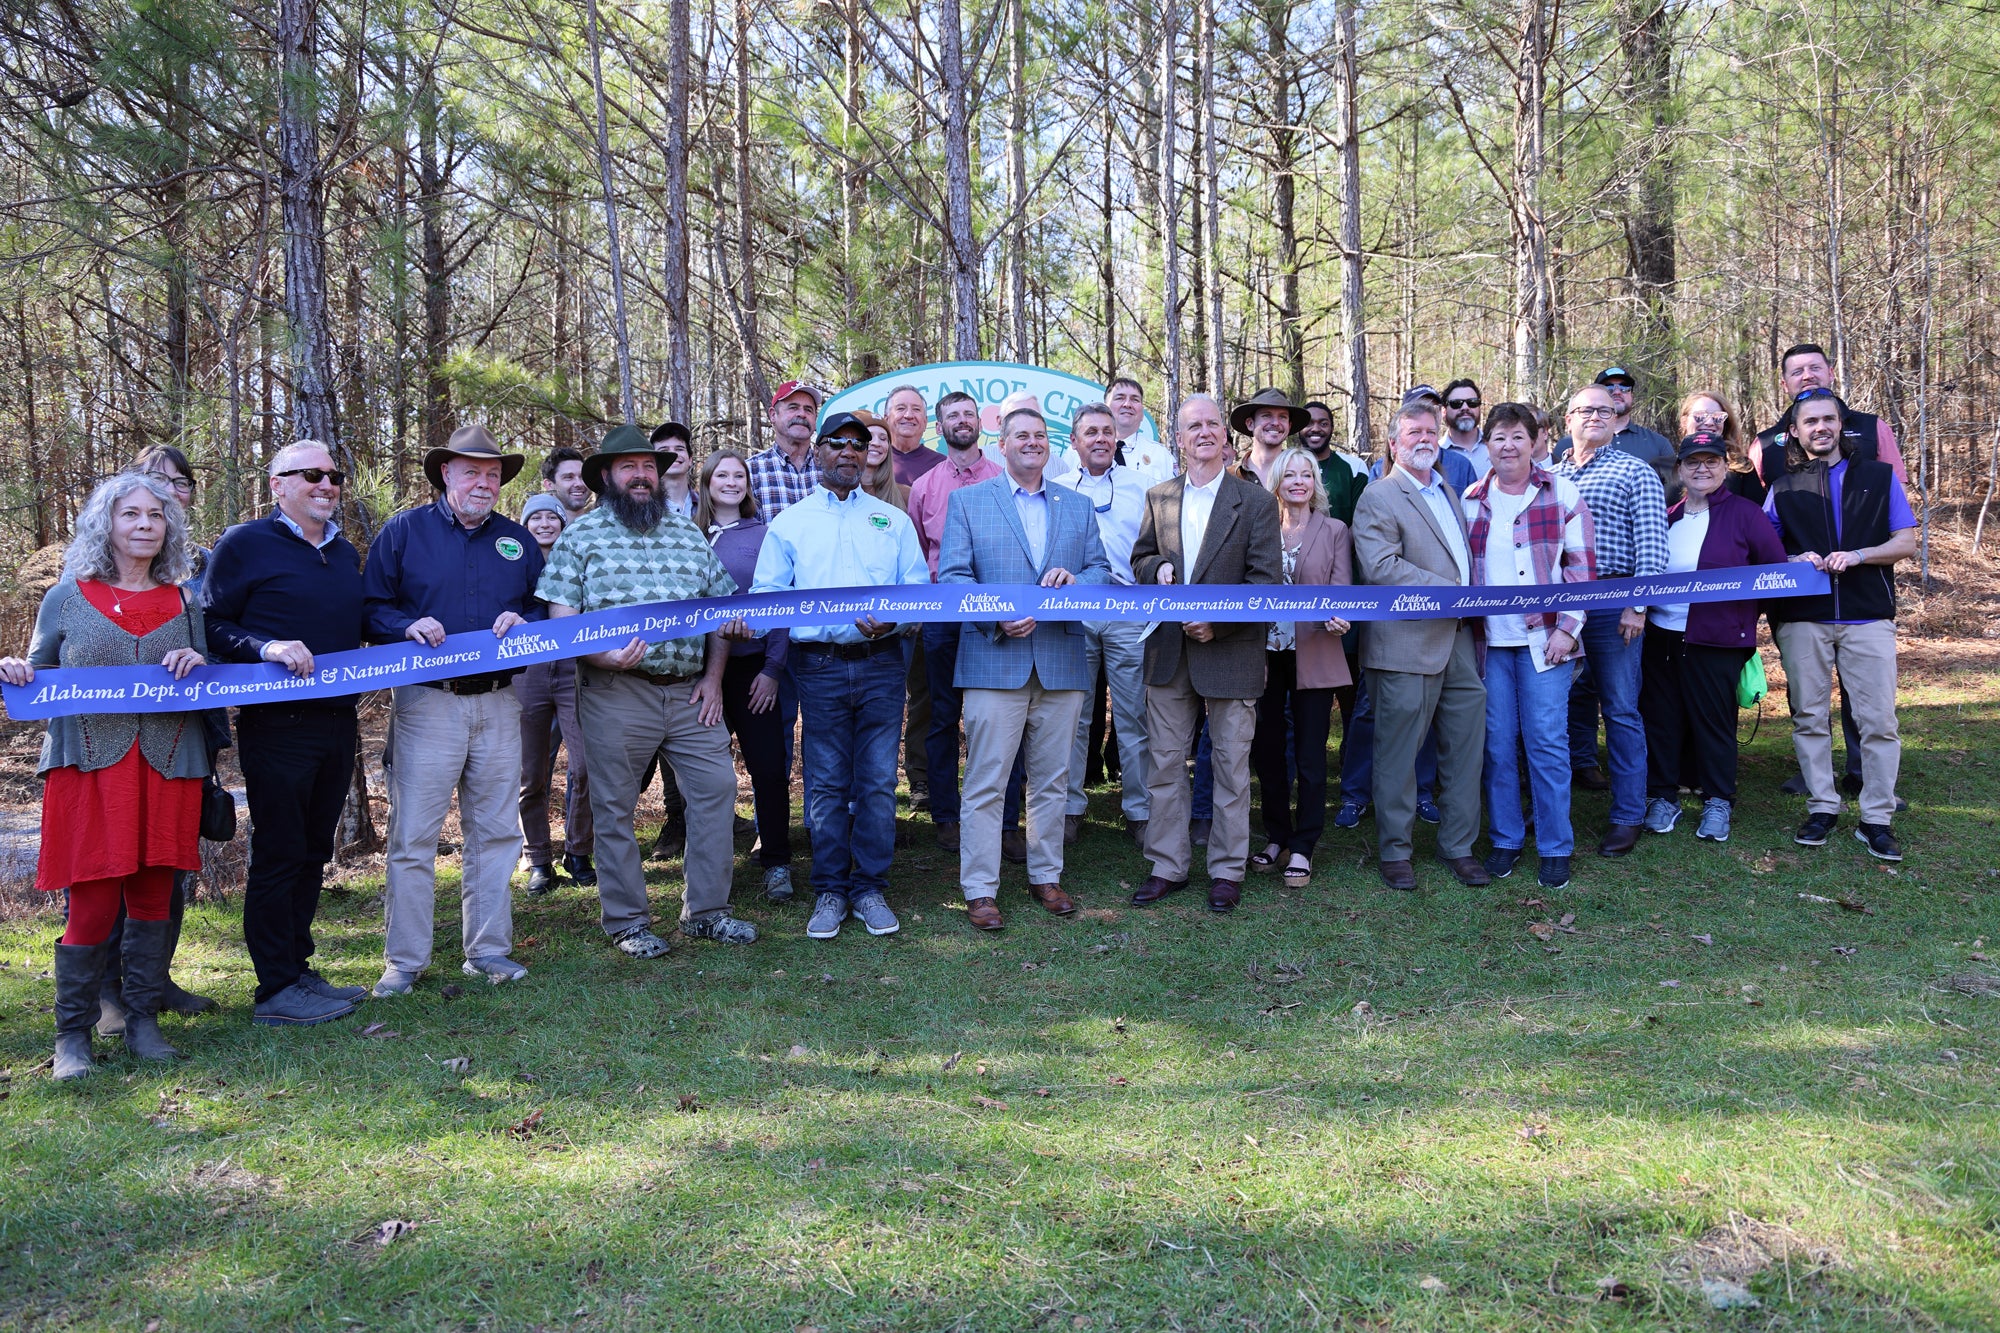 Big Canoe Creek Nature Preserve in Springville Provides New Outdoor Recreation Opportunities in Central Alabama